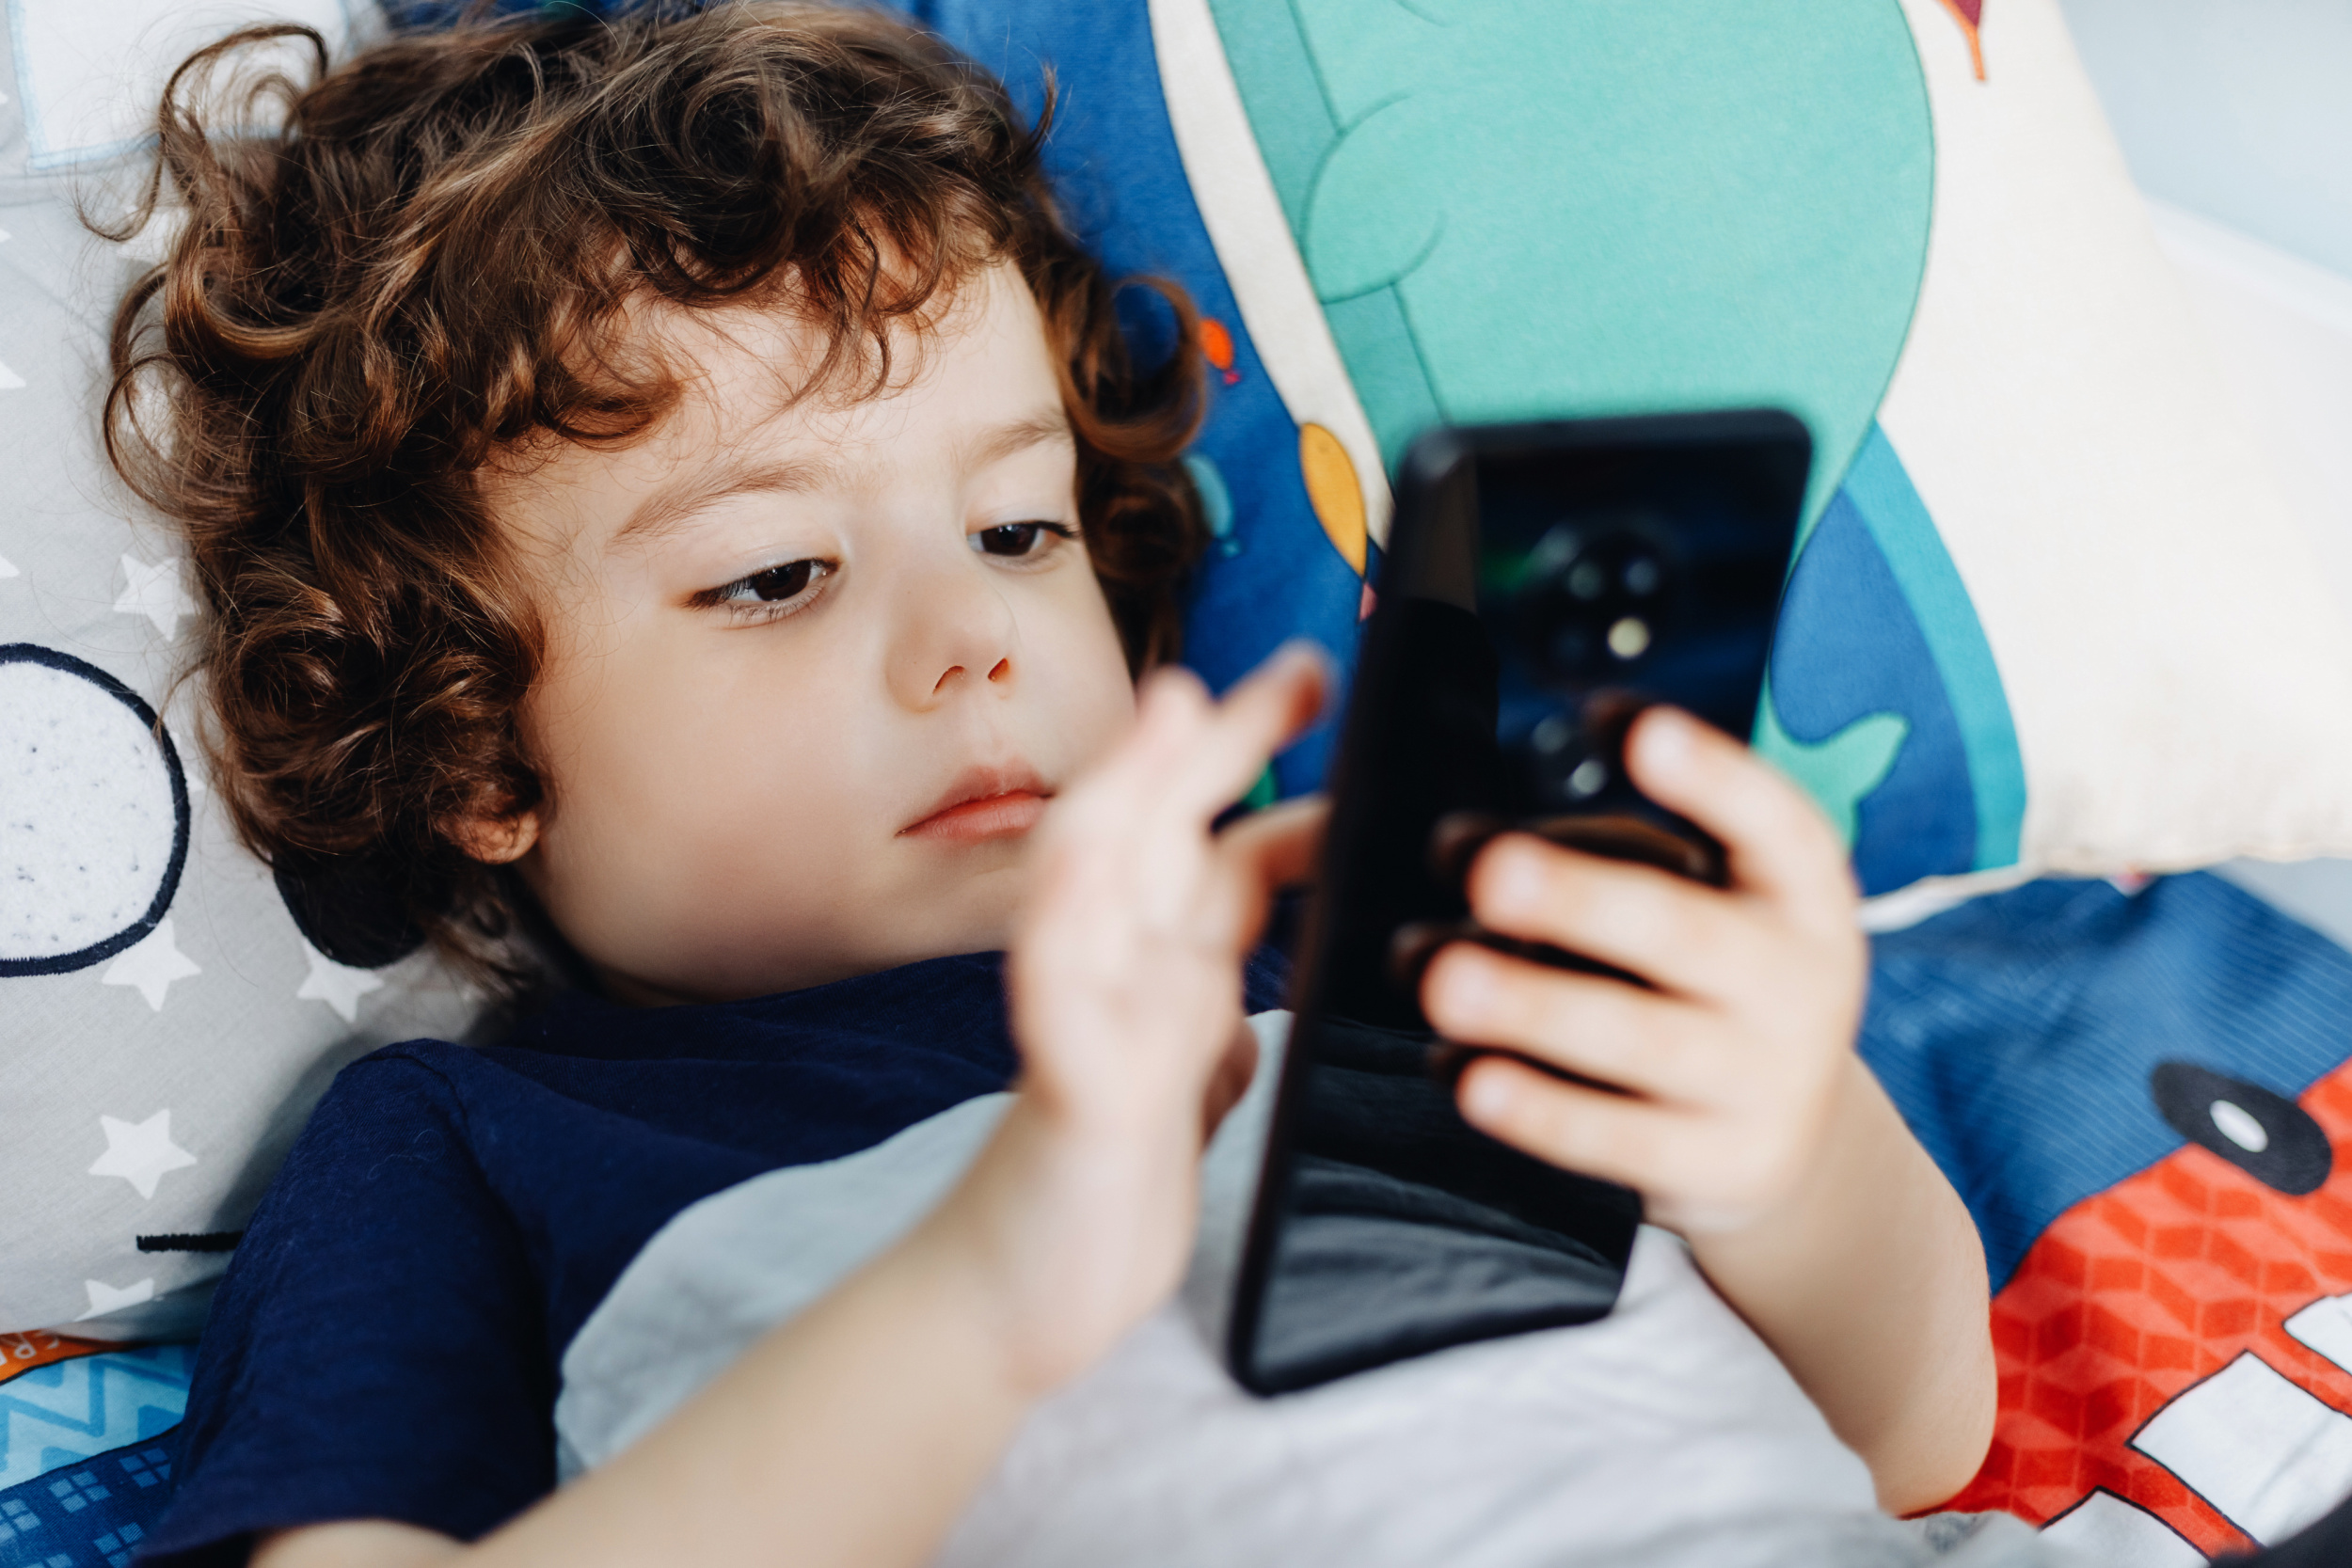 2 wow-i-like-that-phone-baby-with-smartphone-boy-sitting-bed-playing-with-mobile-phone-calling-my-mom-cute-little-baby-holds-mobile-phone-his-hands-looking-attentively-screen.jpg